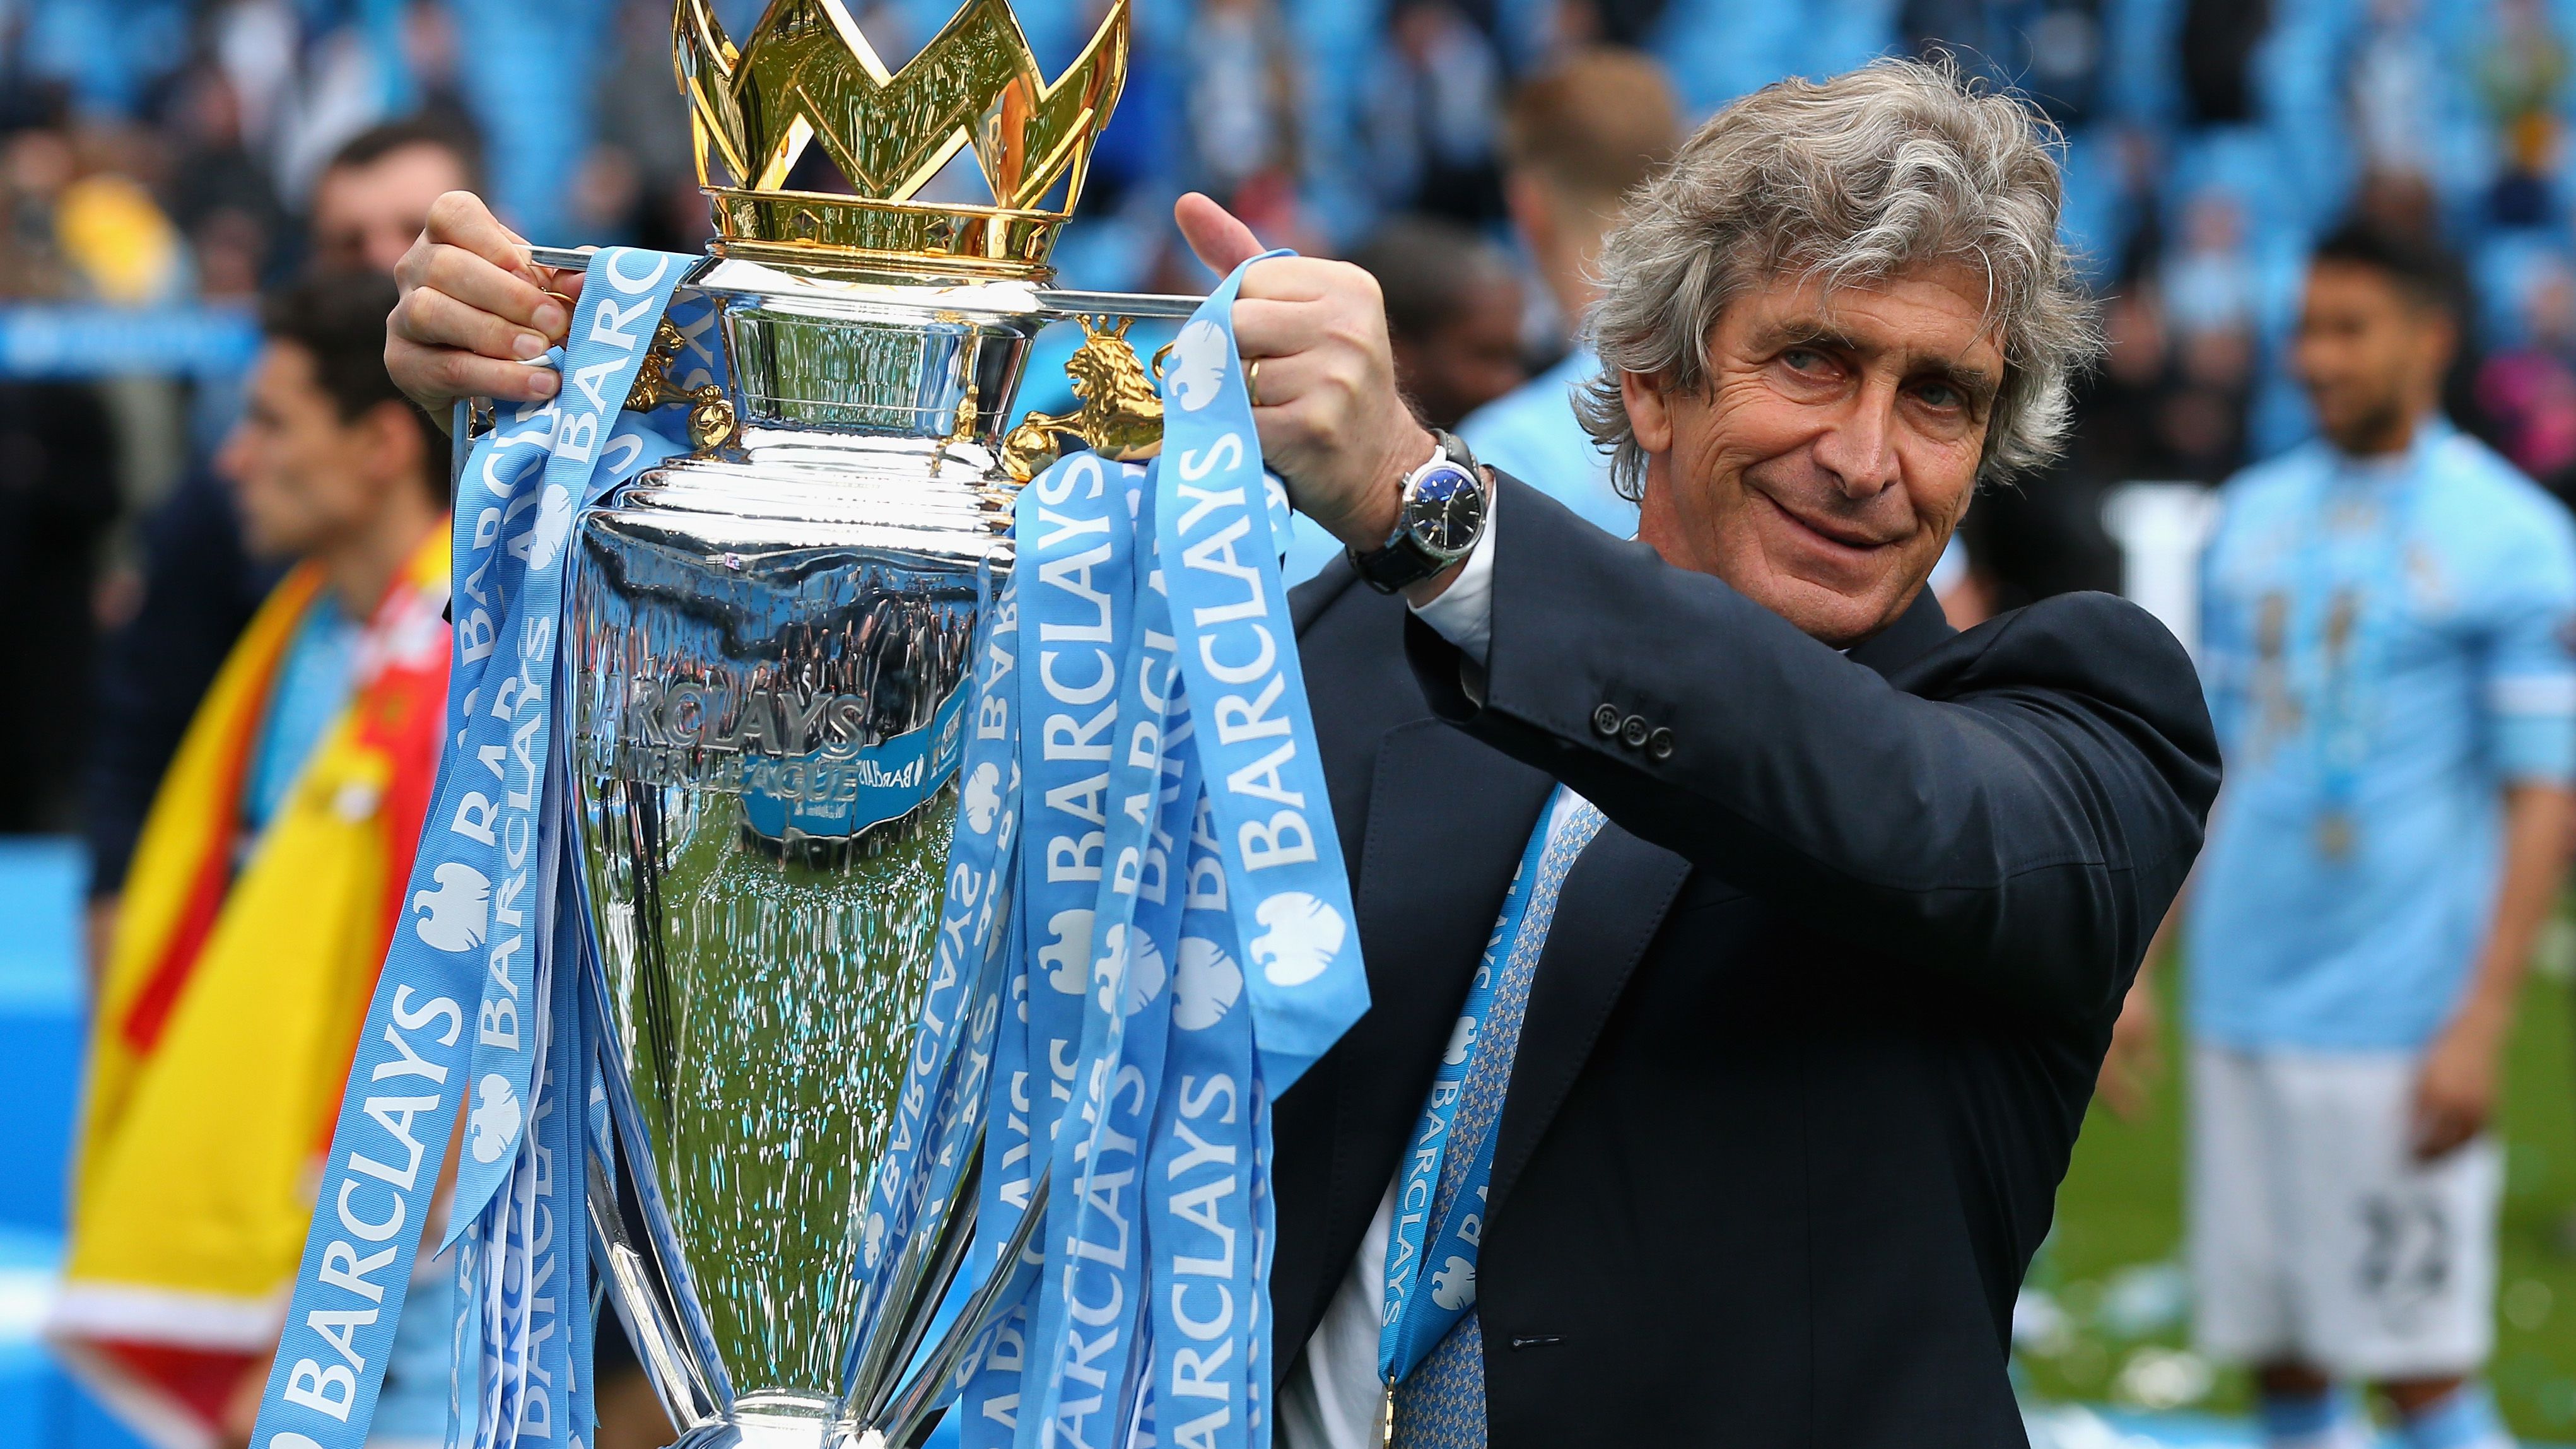 Manuel Pellegrini led Manchester City to the Premier League title in his first season in charge.